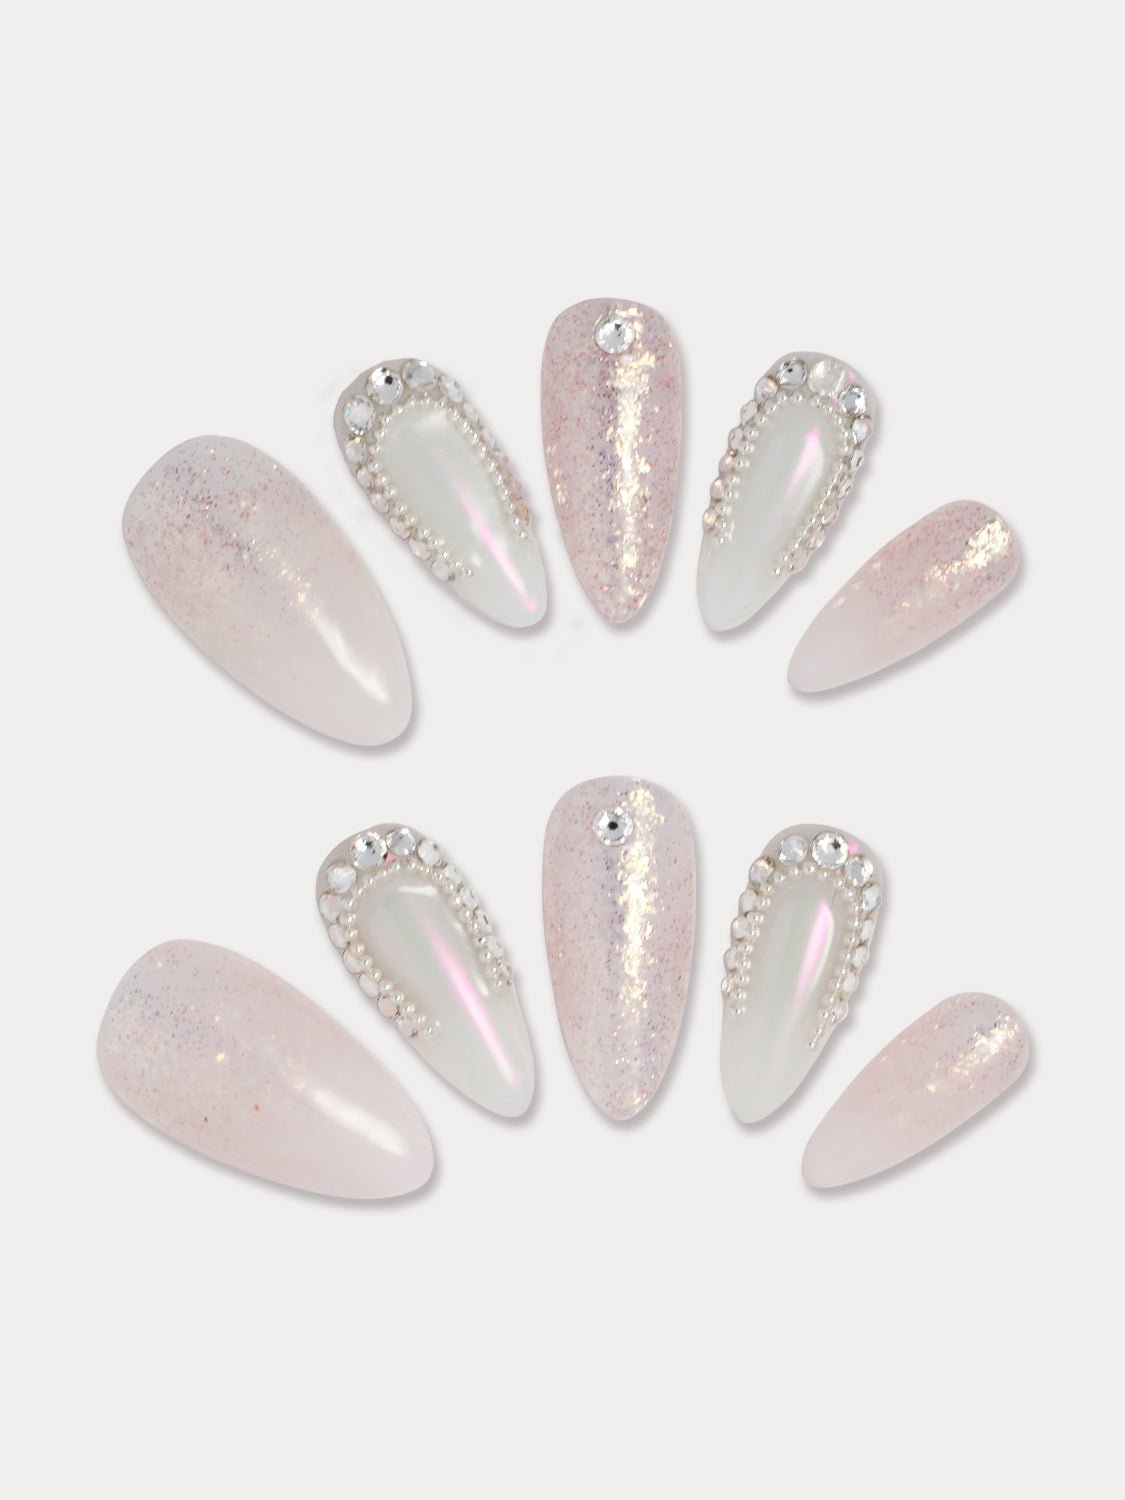 White and silver glitter coffin acrylic nails | Glitter nails acrylic,  Christmas nails acrylic, One glitter nails